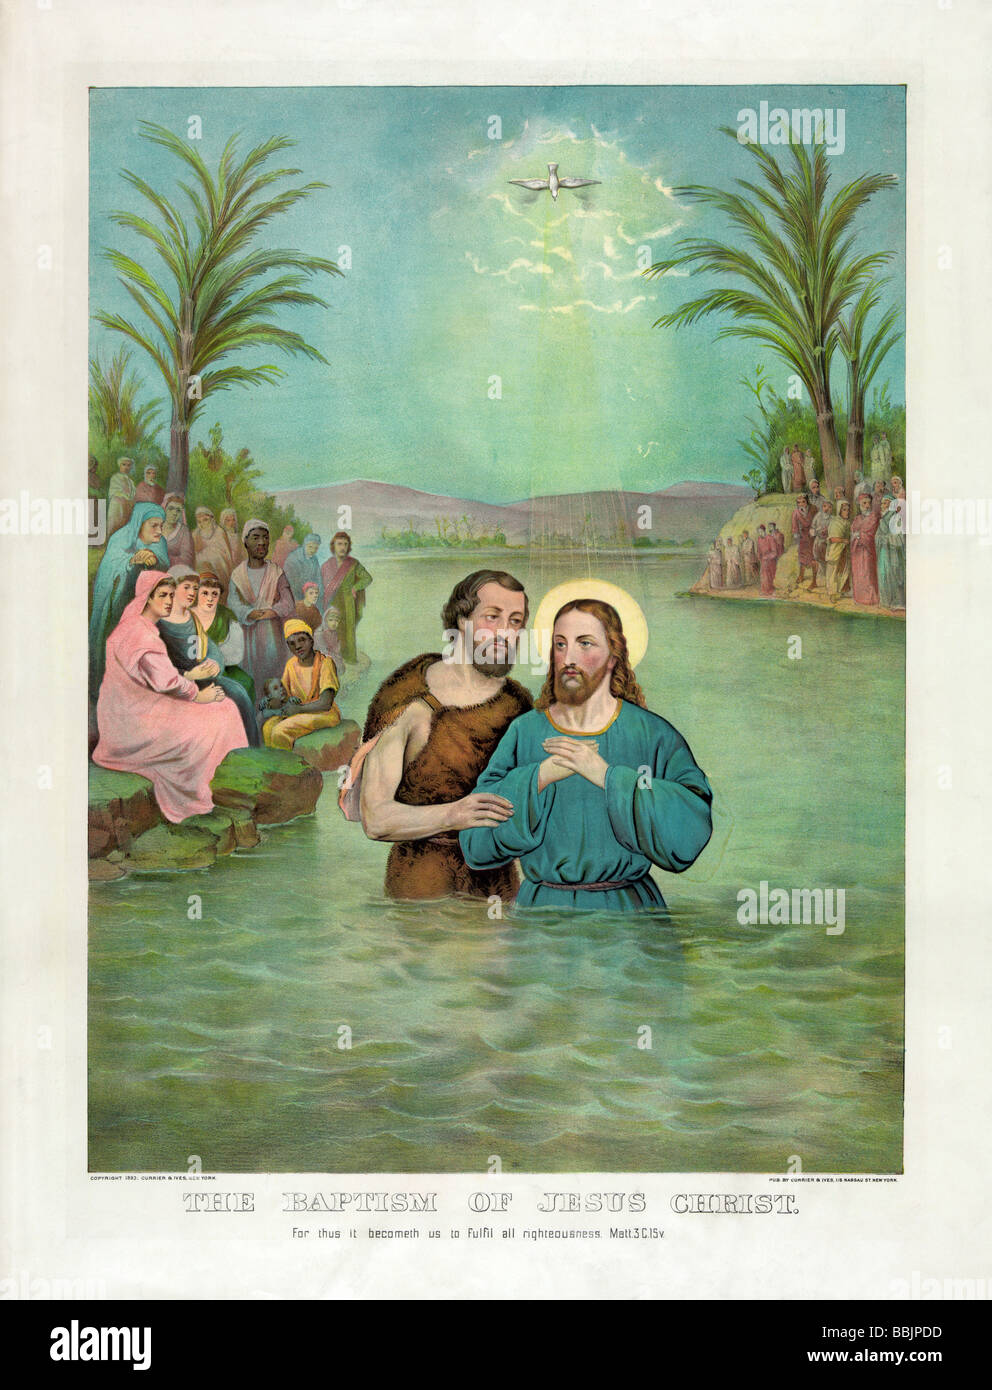 Print published in 1893 by Currier & Ives entitled “The Baptism of Jesus Christ” and showing John the Baptist baptising Jesus. Stock Photo